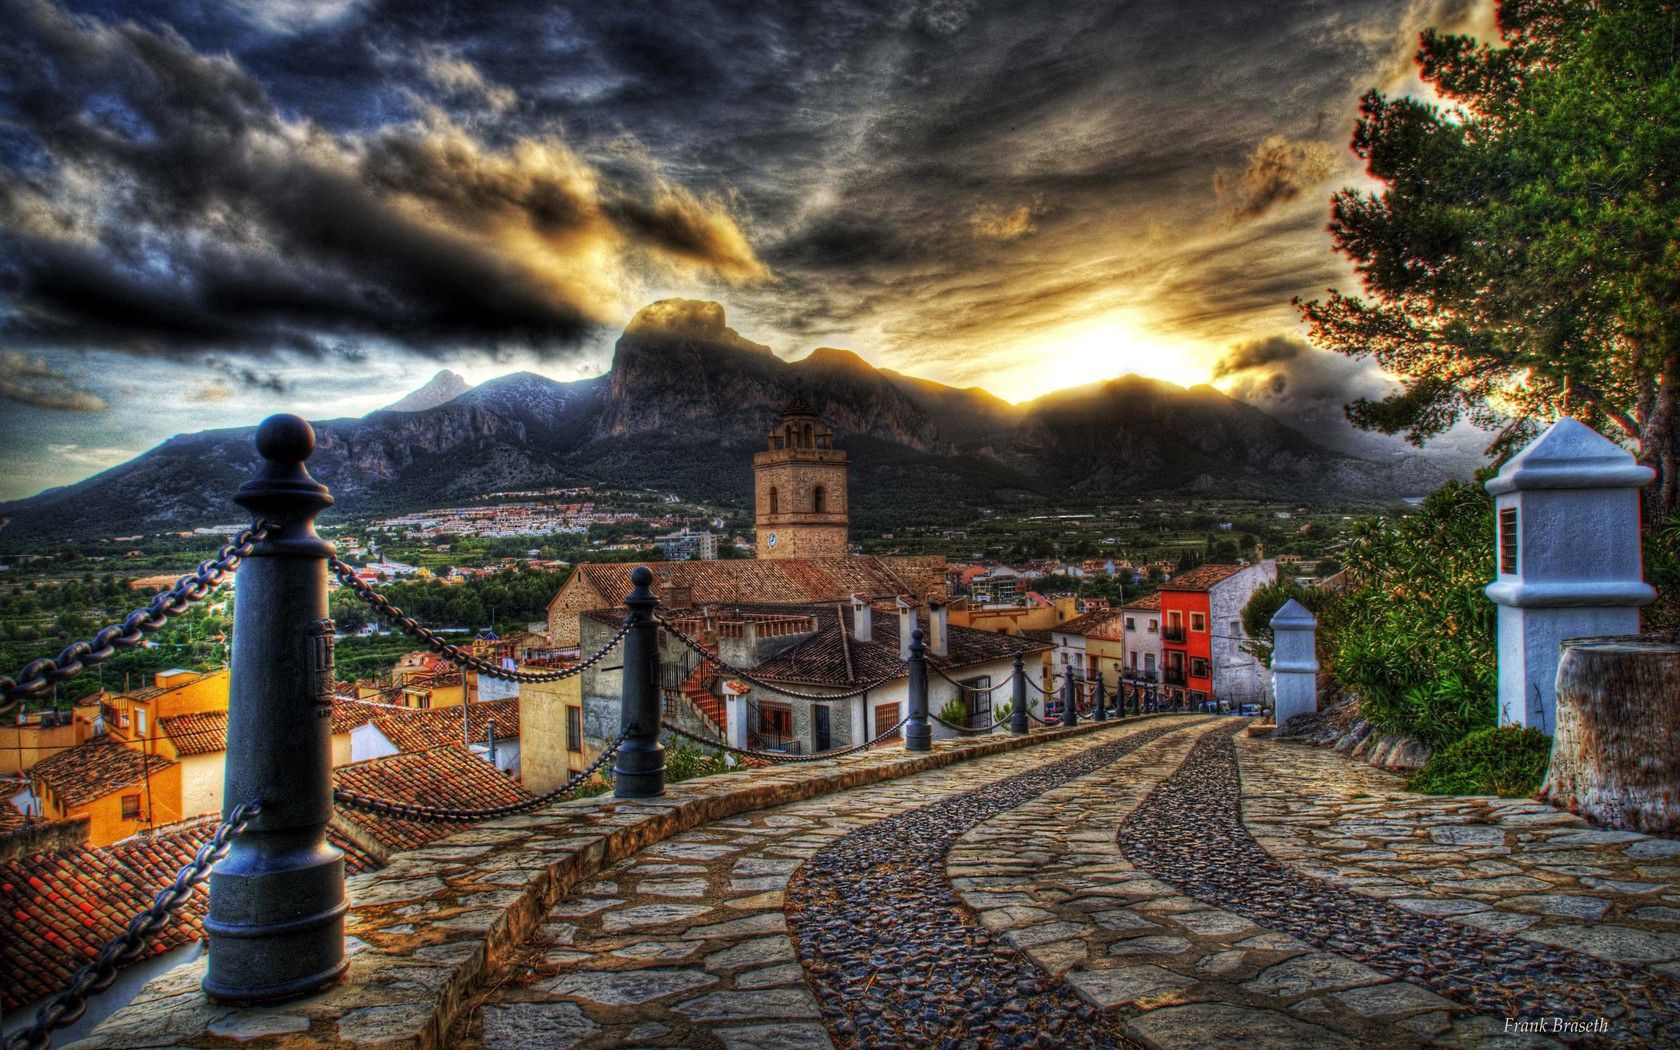 android streets, sky, cities, flowers, houses, sunset, mountains, architecture, clouds, road, beautiful, old, colorful, hdr